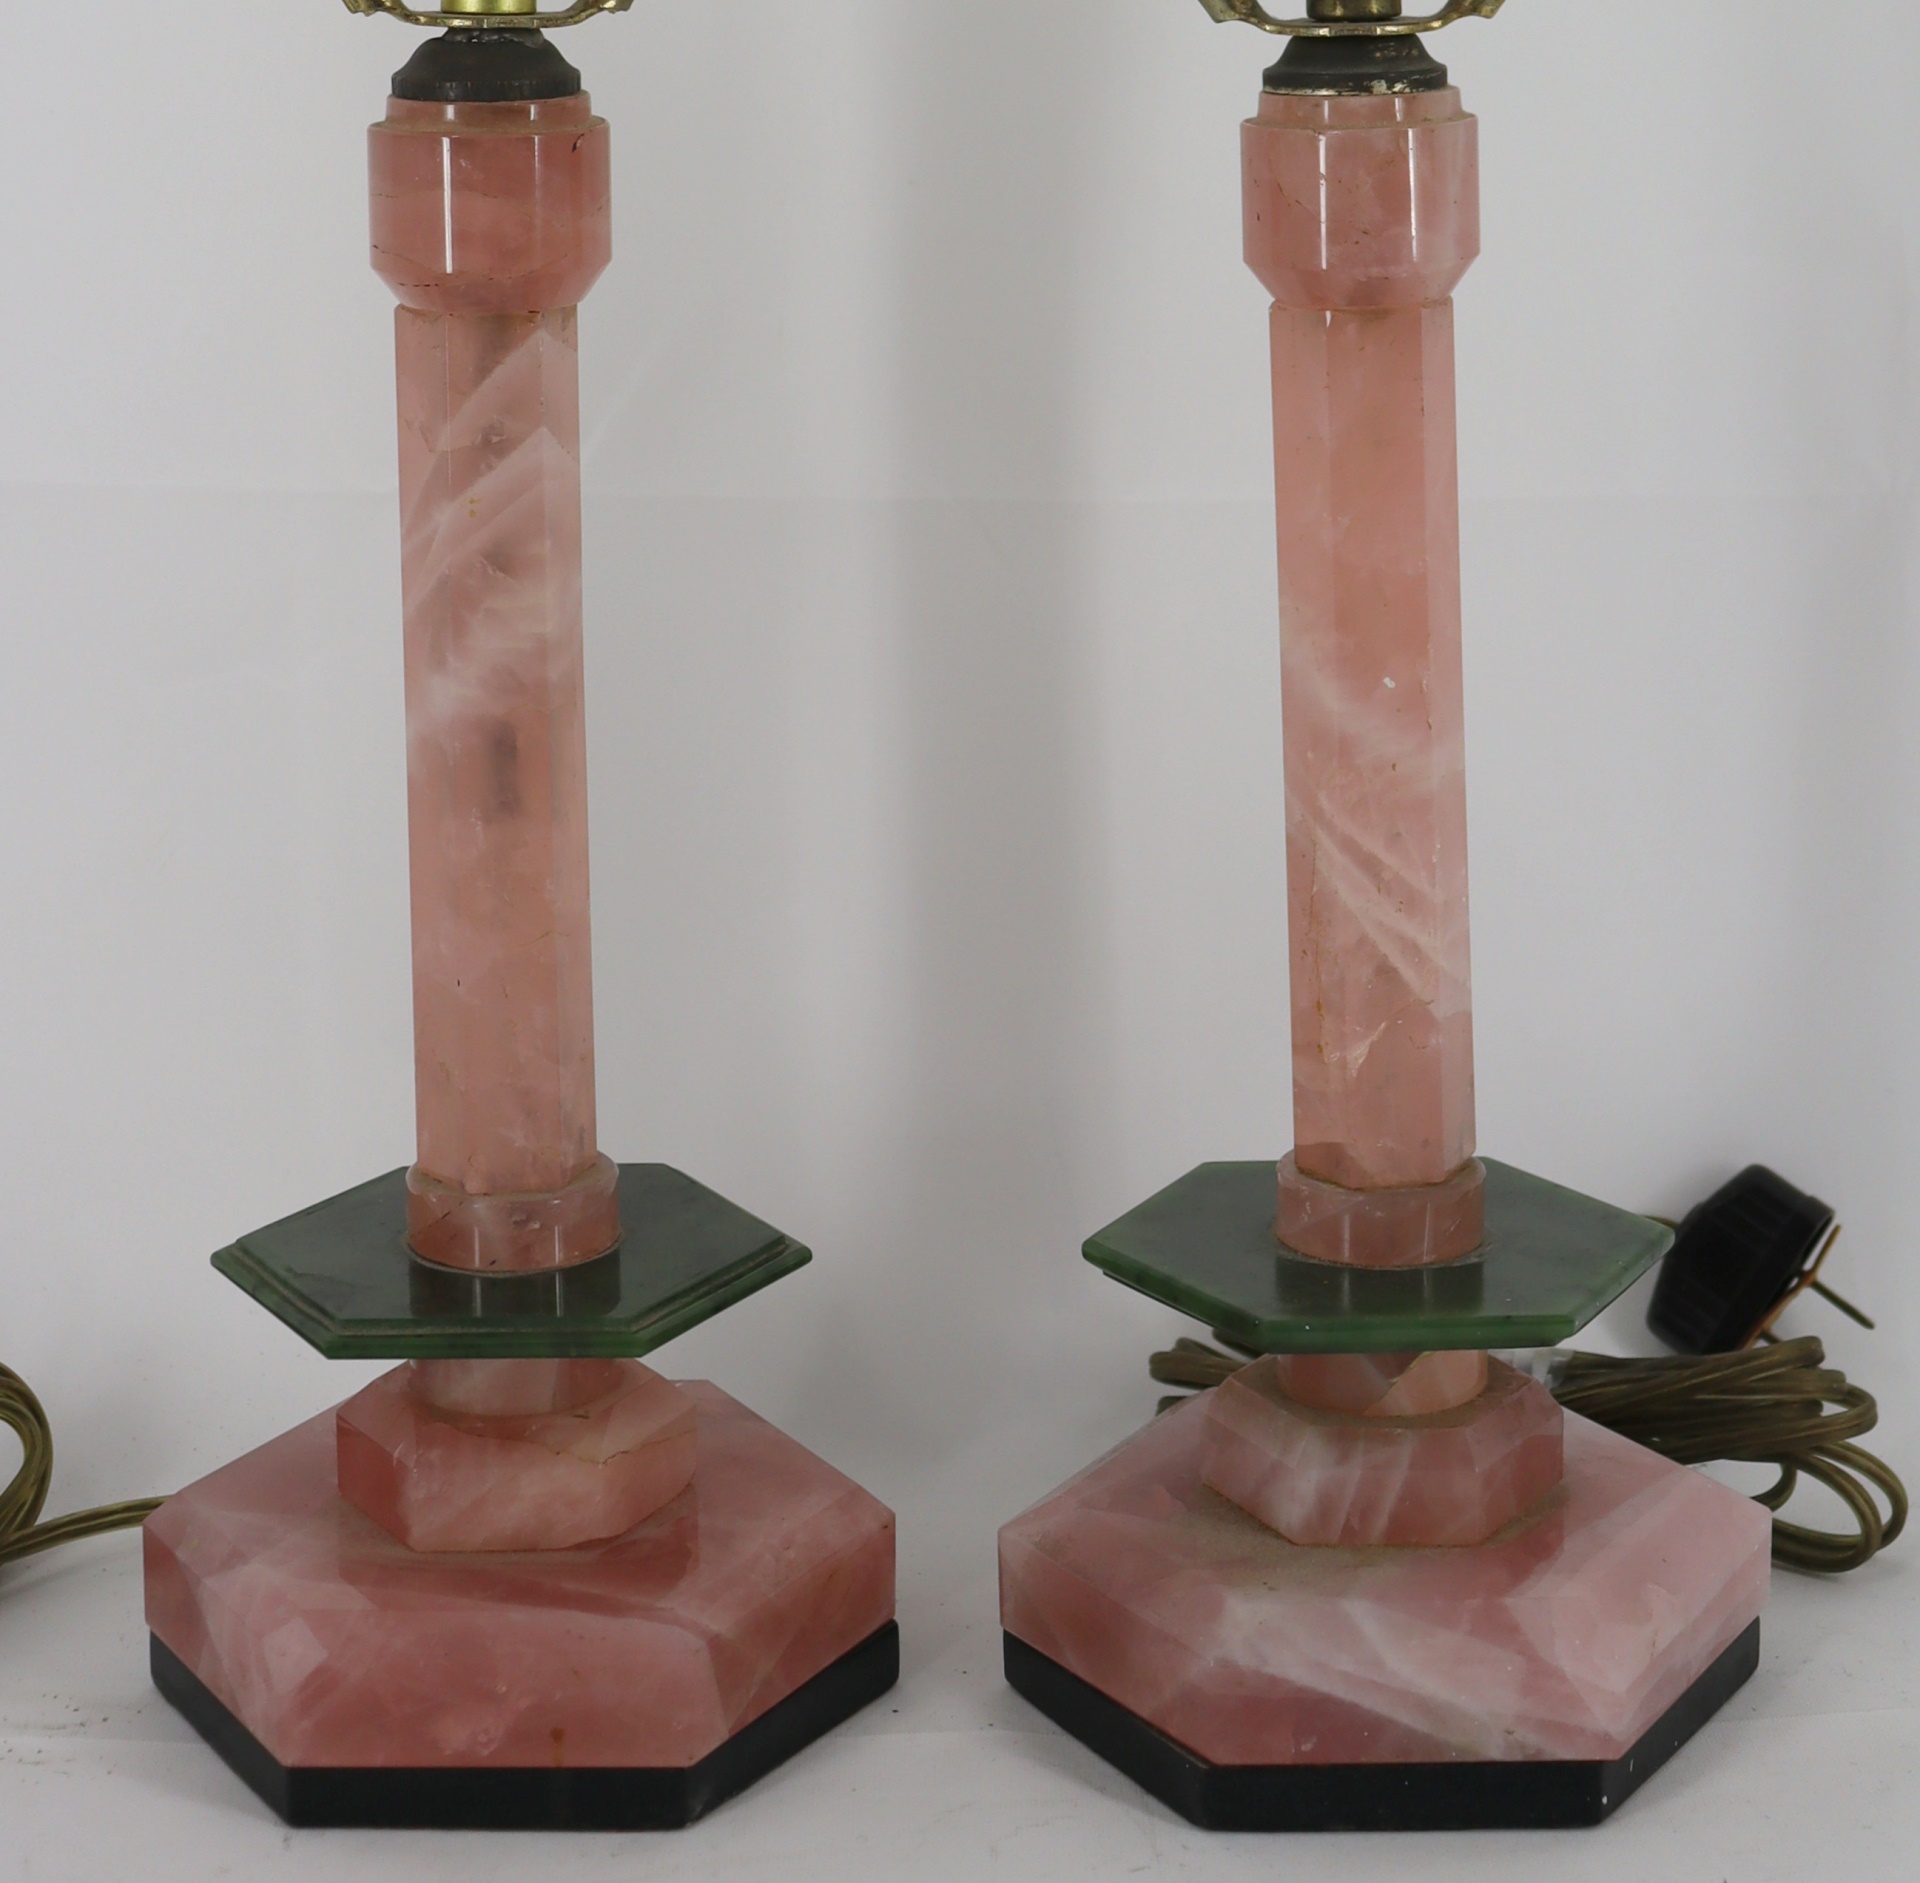 2 PAIRS OF LAMPS INCLUDING BRONZE 3b9008